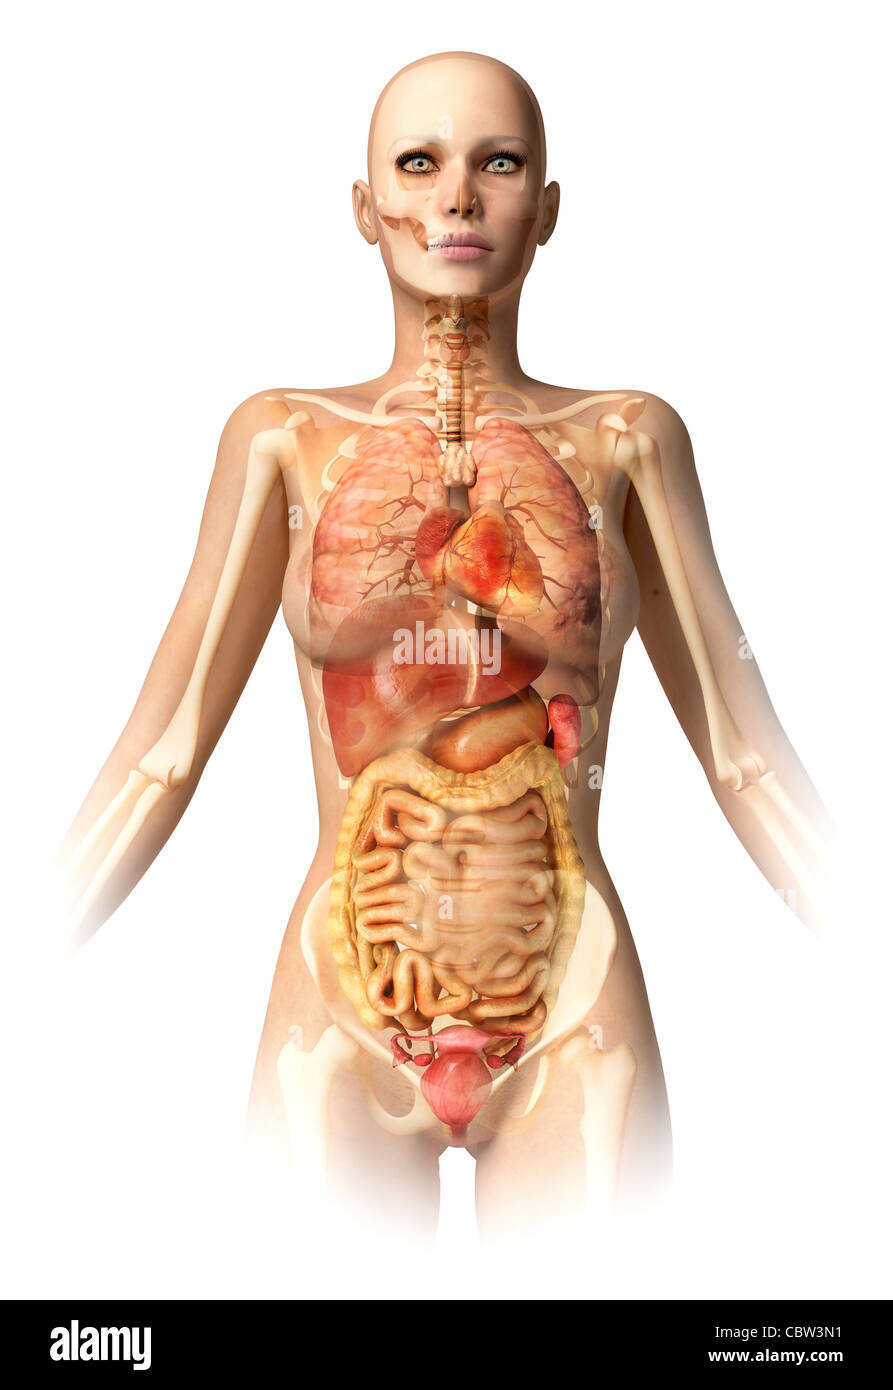 Woman body, with bone skeleton and all interior organs superimposed. With clipping path included. Anatomy image. Stock Photo